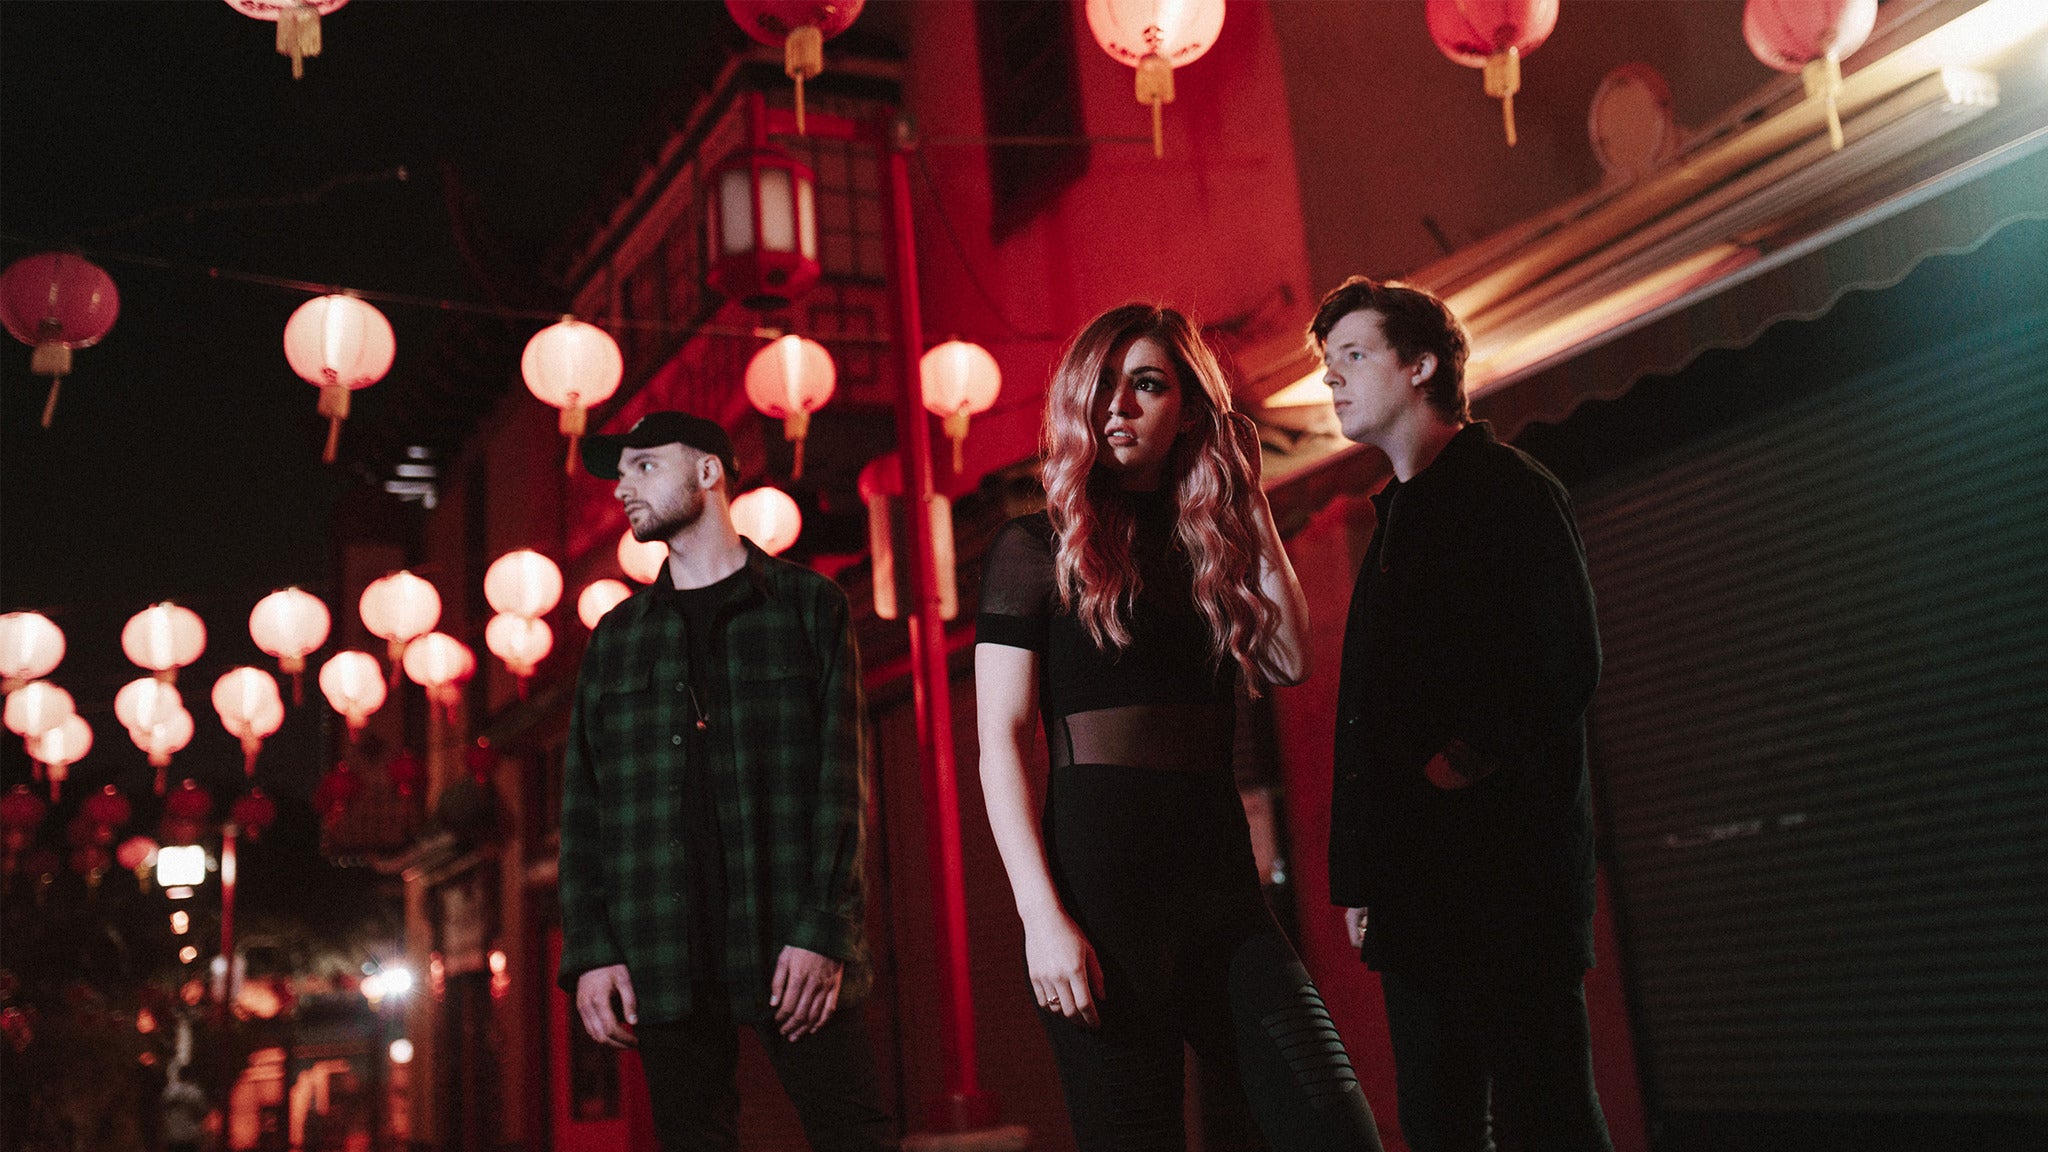 AGAINST THE CURRENT - Past Lives World Tour 2019 in Atlanta promo photo for Artist presale offer code